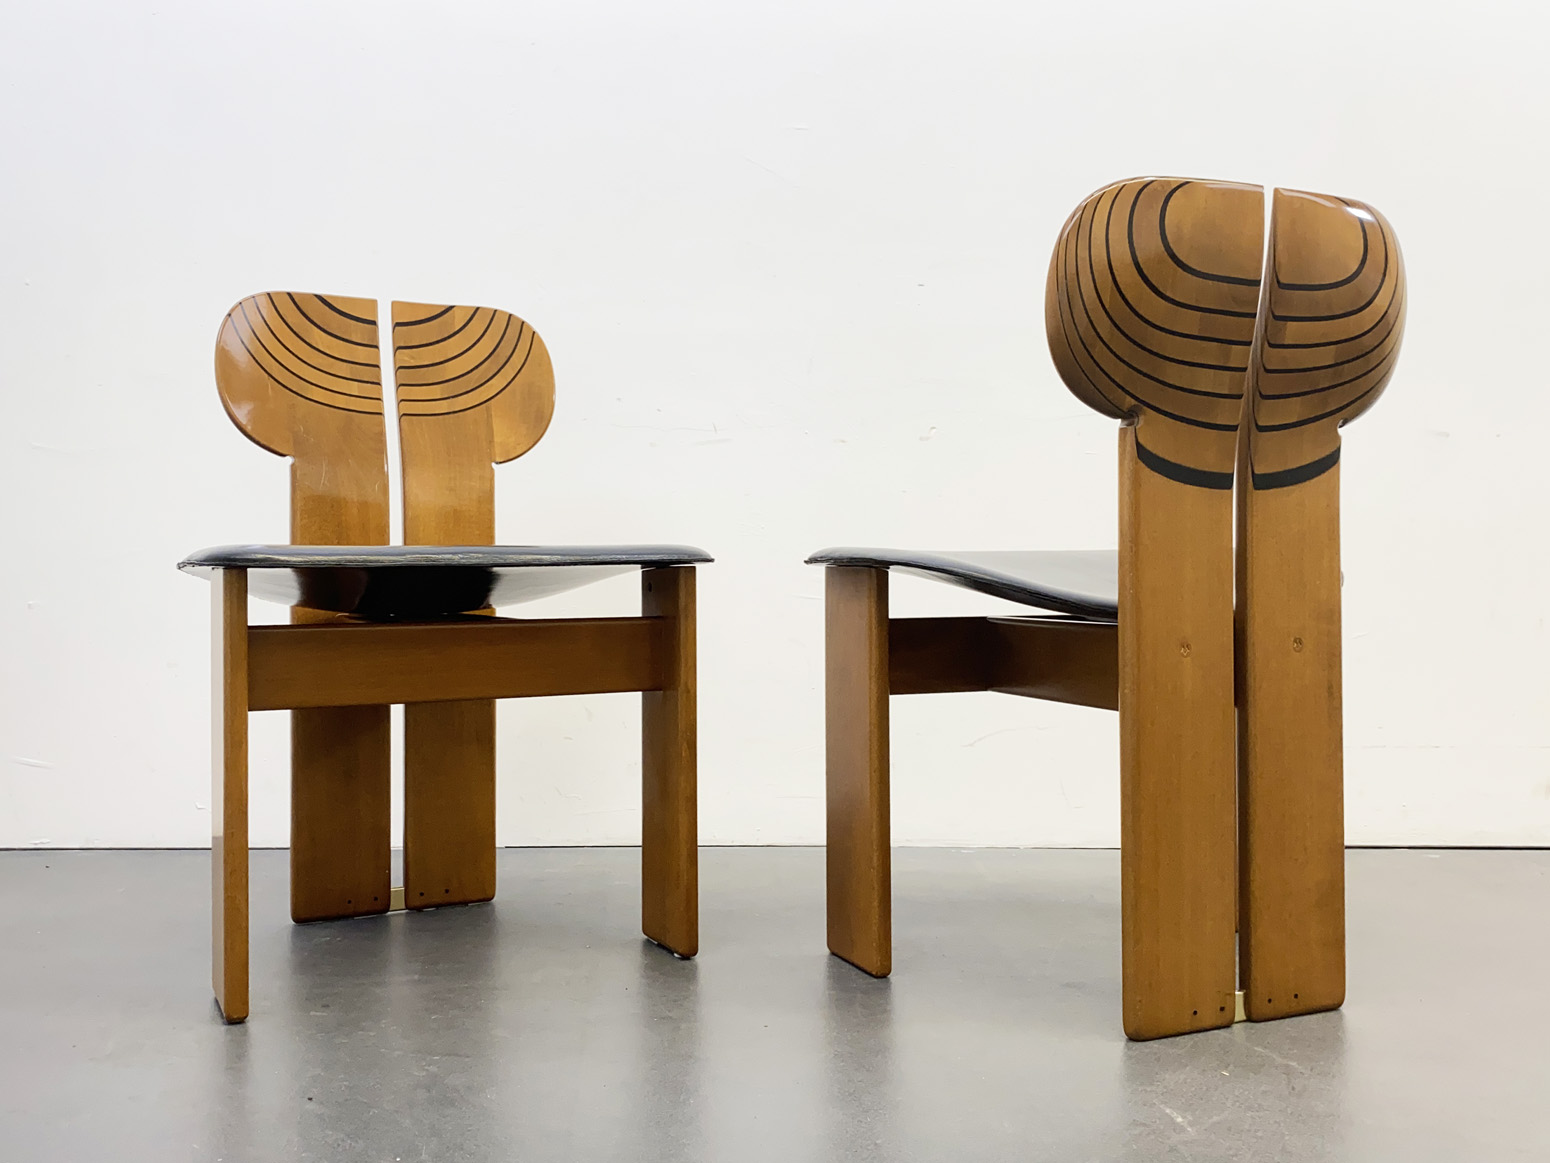 “SOLD” Pair of  Dining Chairs, Mod. Africa, Artona Series, by Afra & Tobia Scarpa for Maxalto, Italy, 70s.